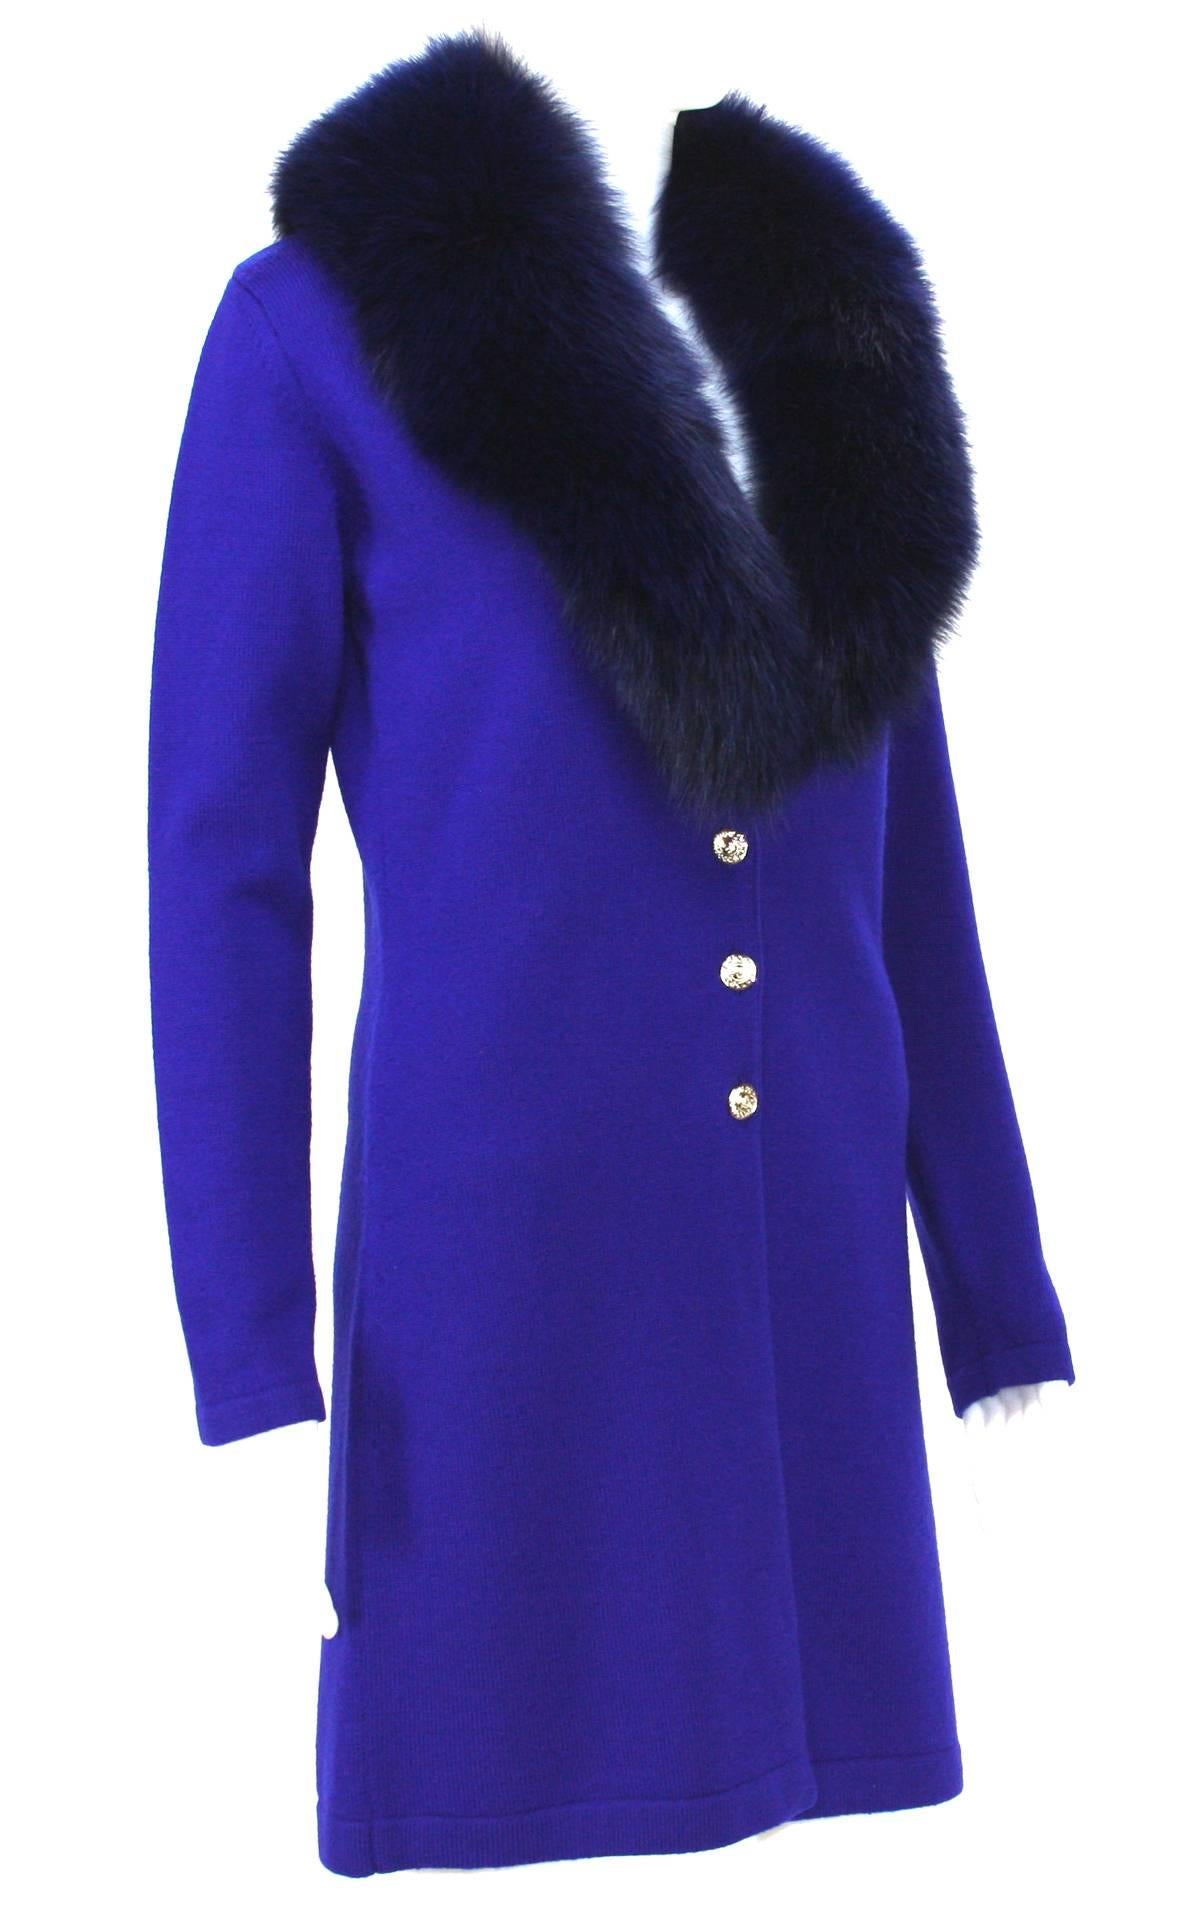 New VERSACE Wool Cardigan with Detachable Fox Collar Cardigan
Italian Size 44
Color - Purple Blue
100% Wool
Real Colored Fox Fur - Origin Finland
Collar Reverse - 100% Silk
Collar Detachable
Gold-tone Buttons Closure with VERSACE